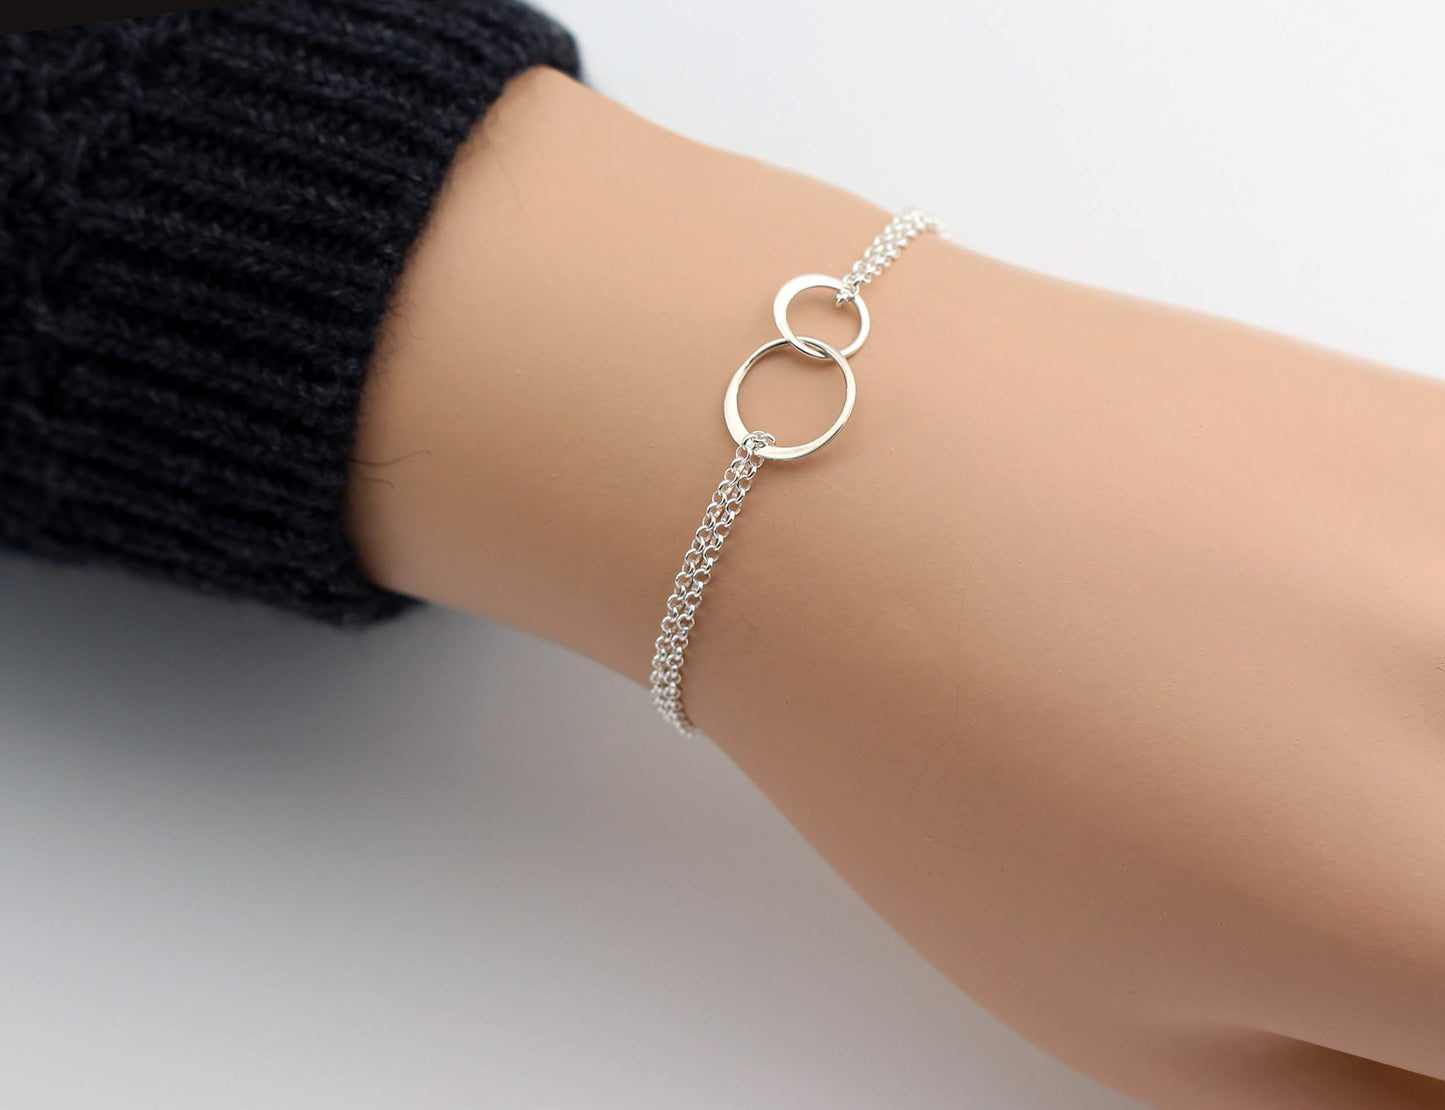 Cousin Gifts for Women • Sterling Silver Bracelet • Two Connected Interlocking Circles • Gift for Cousin Woman • Family Charm • Unique Gift Ideas • Loving Cousin Gifts • Meaningful Jewelry